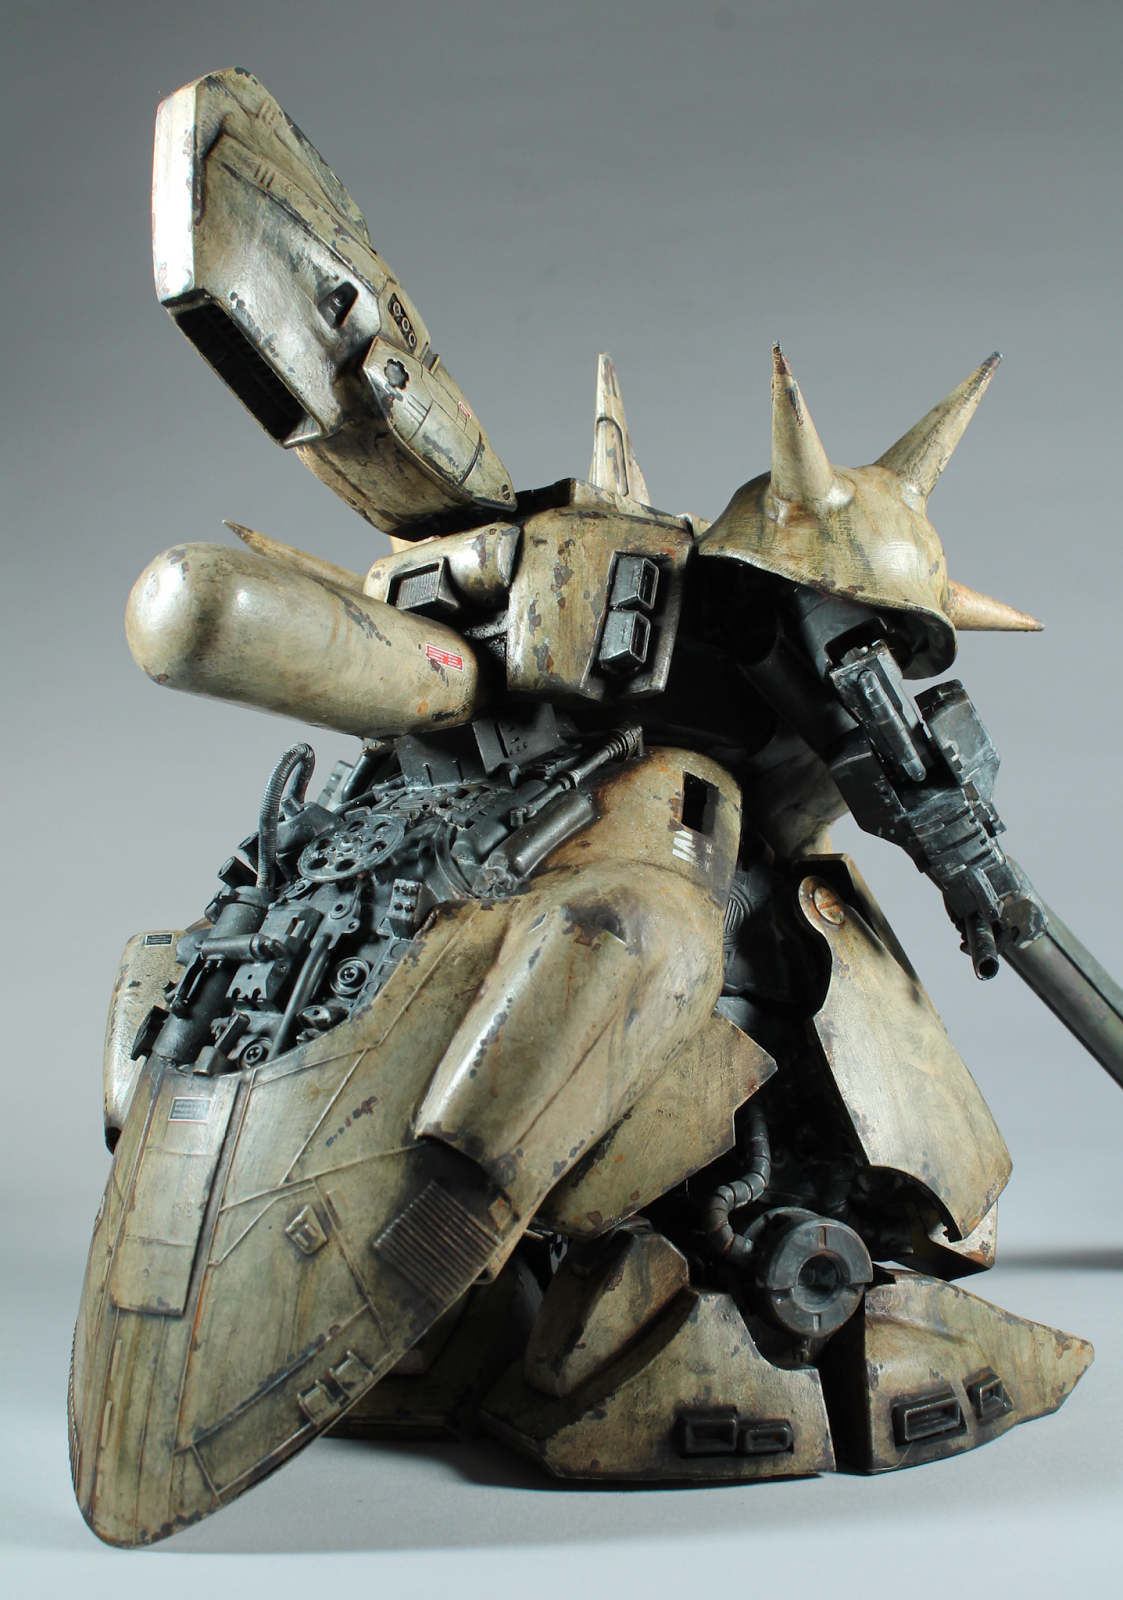 Rare Gundam Model Brought Back From The Dead